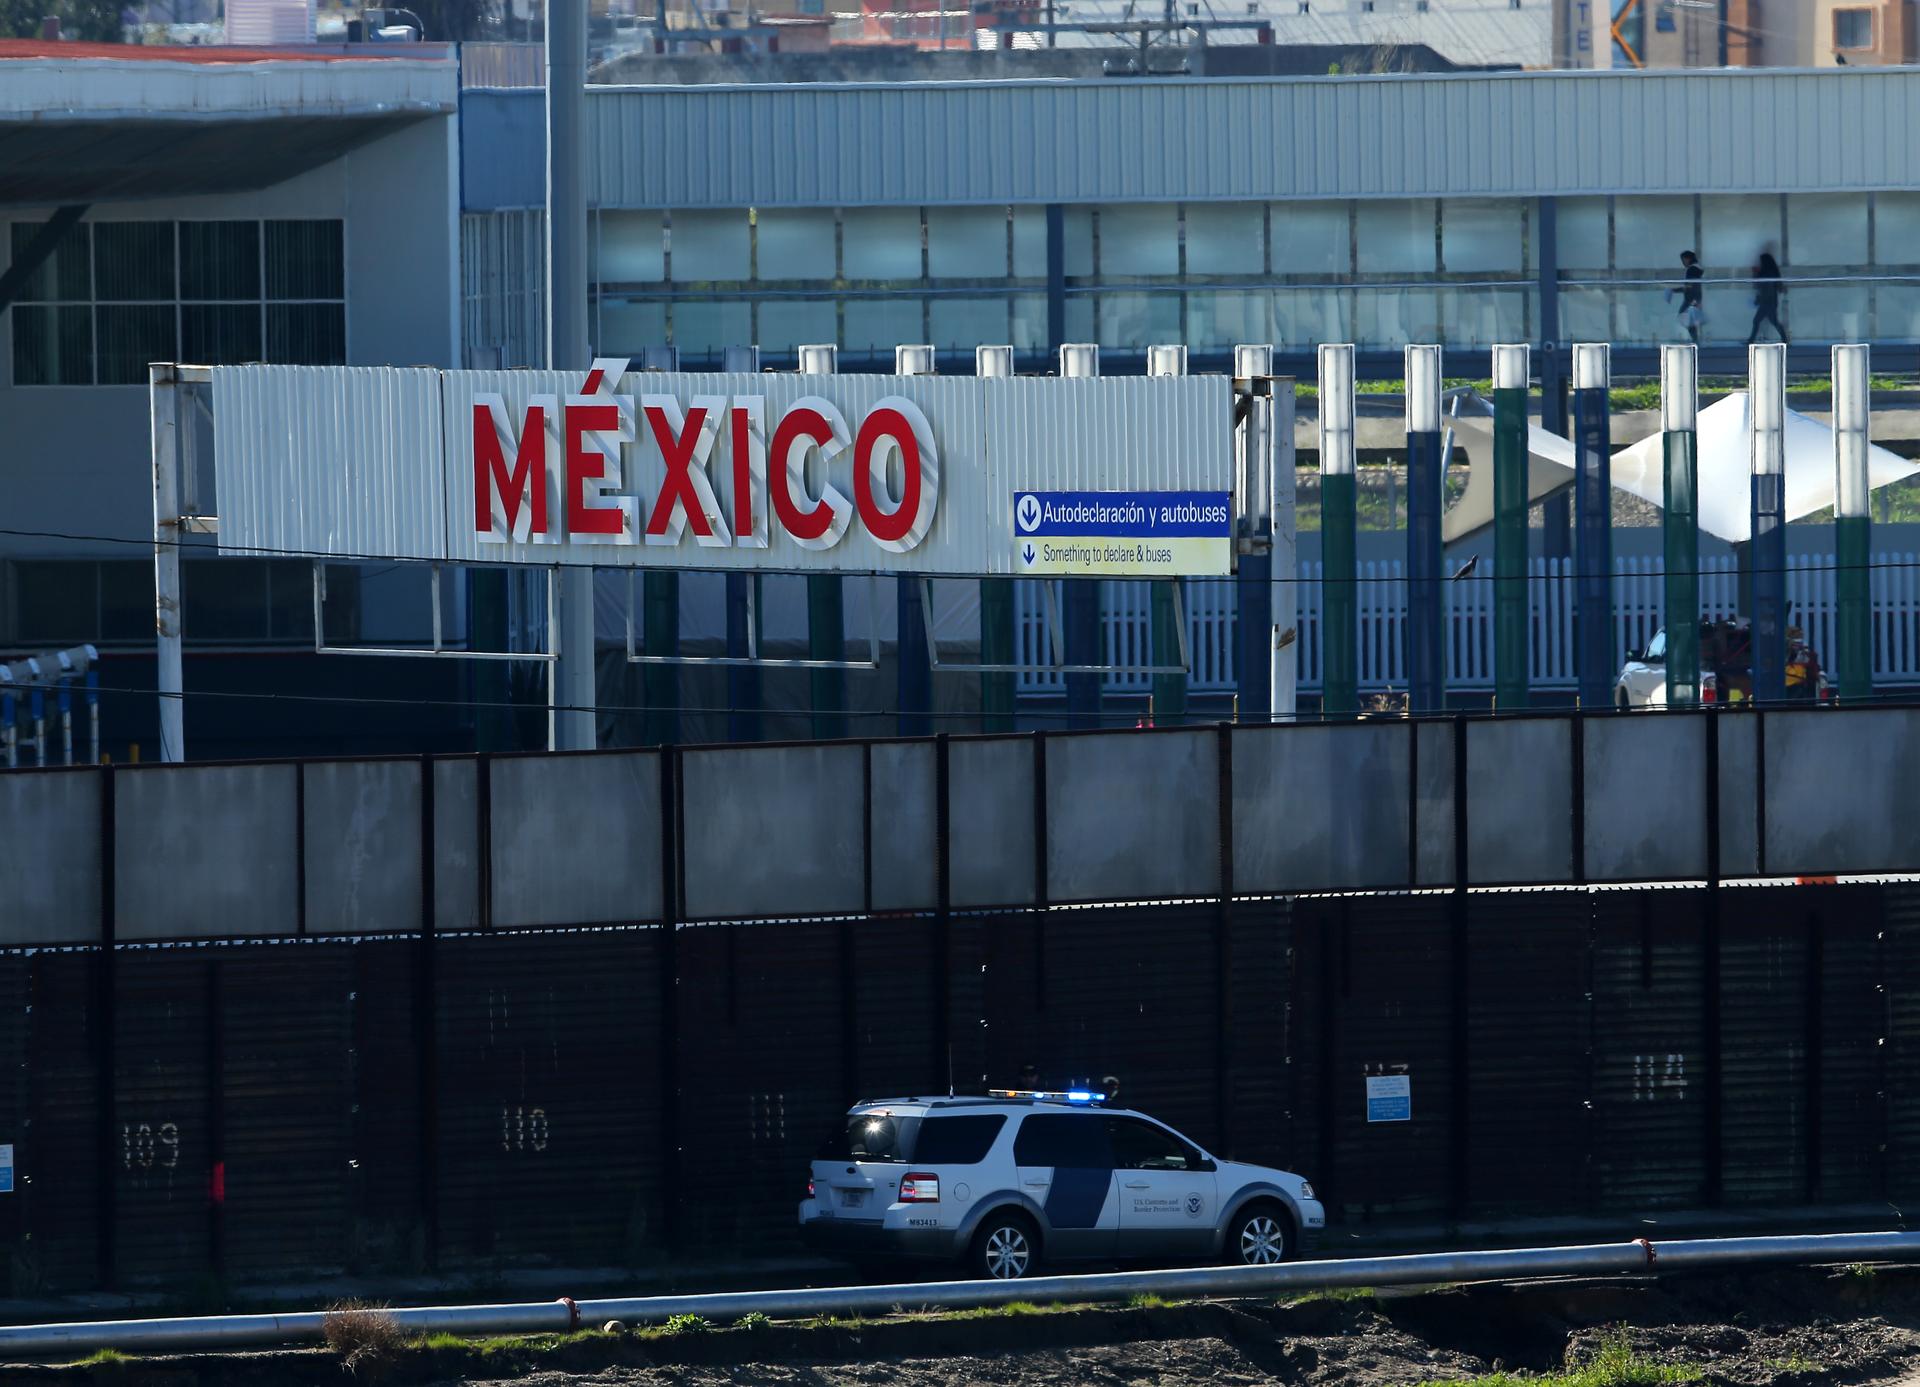 A US border patrol vehicle drives along the border wall between Mexico and the United States